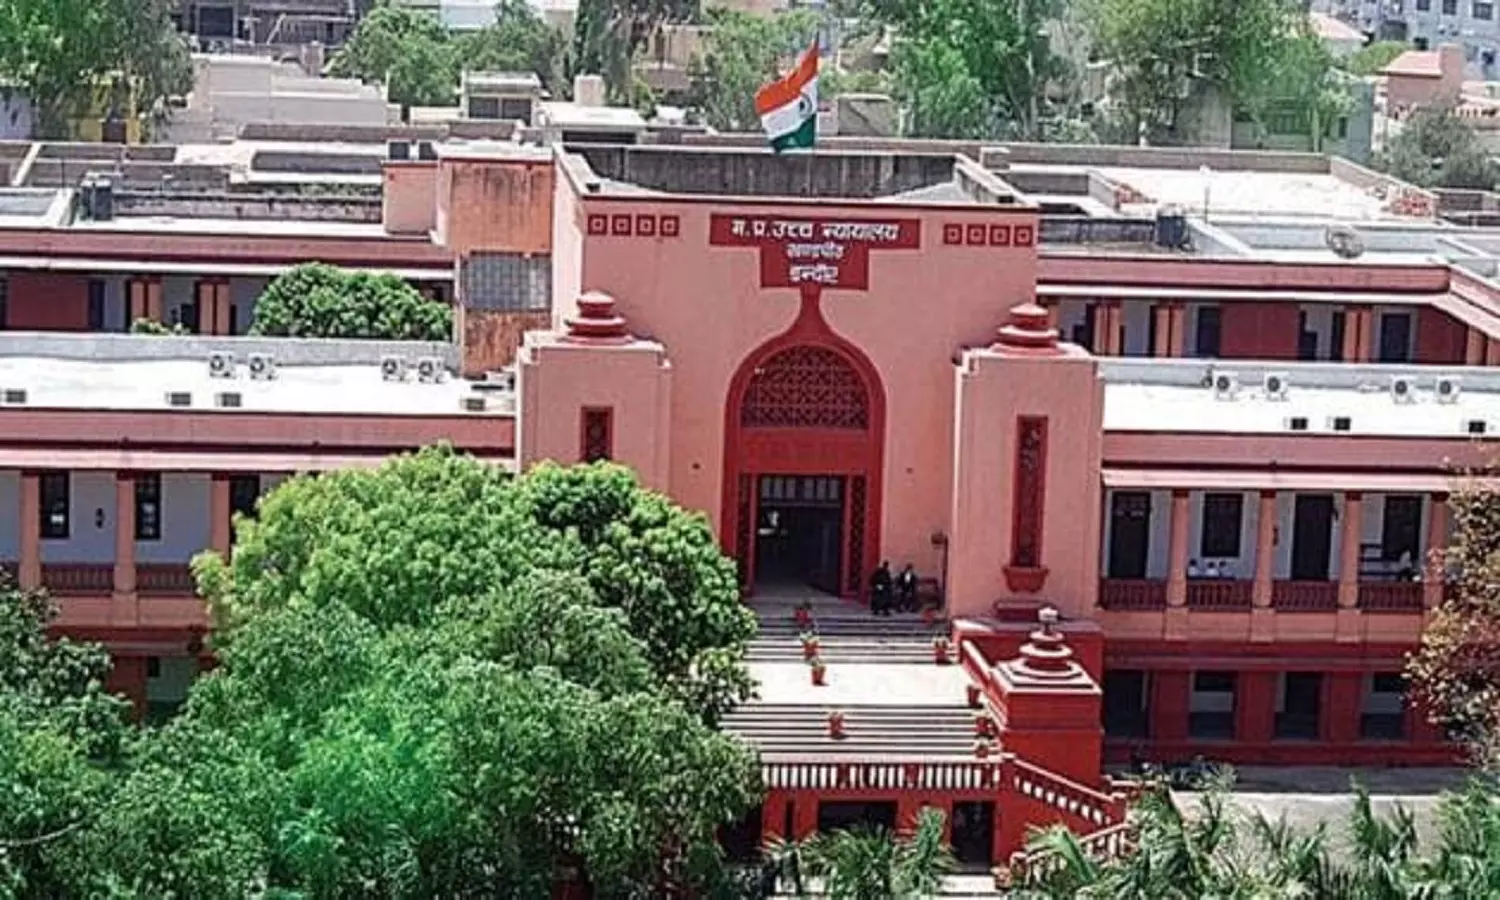 Full course fee, ineligible for next 3 years for PG Degree, 2 years for Diploma: HC seeks states response on double punishment for leaving PG seat